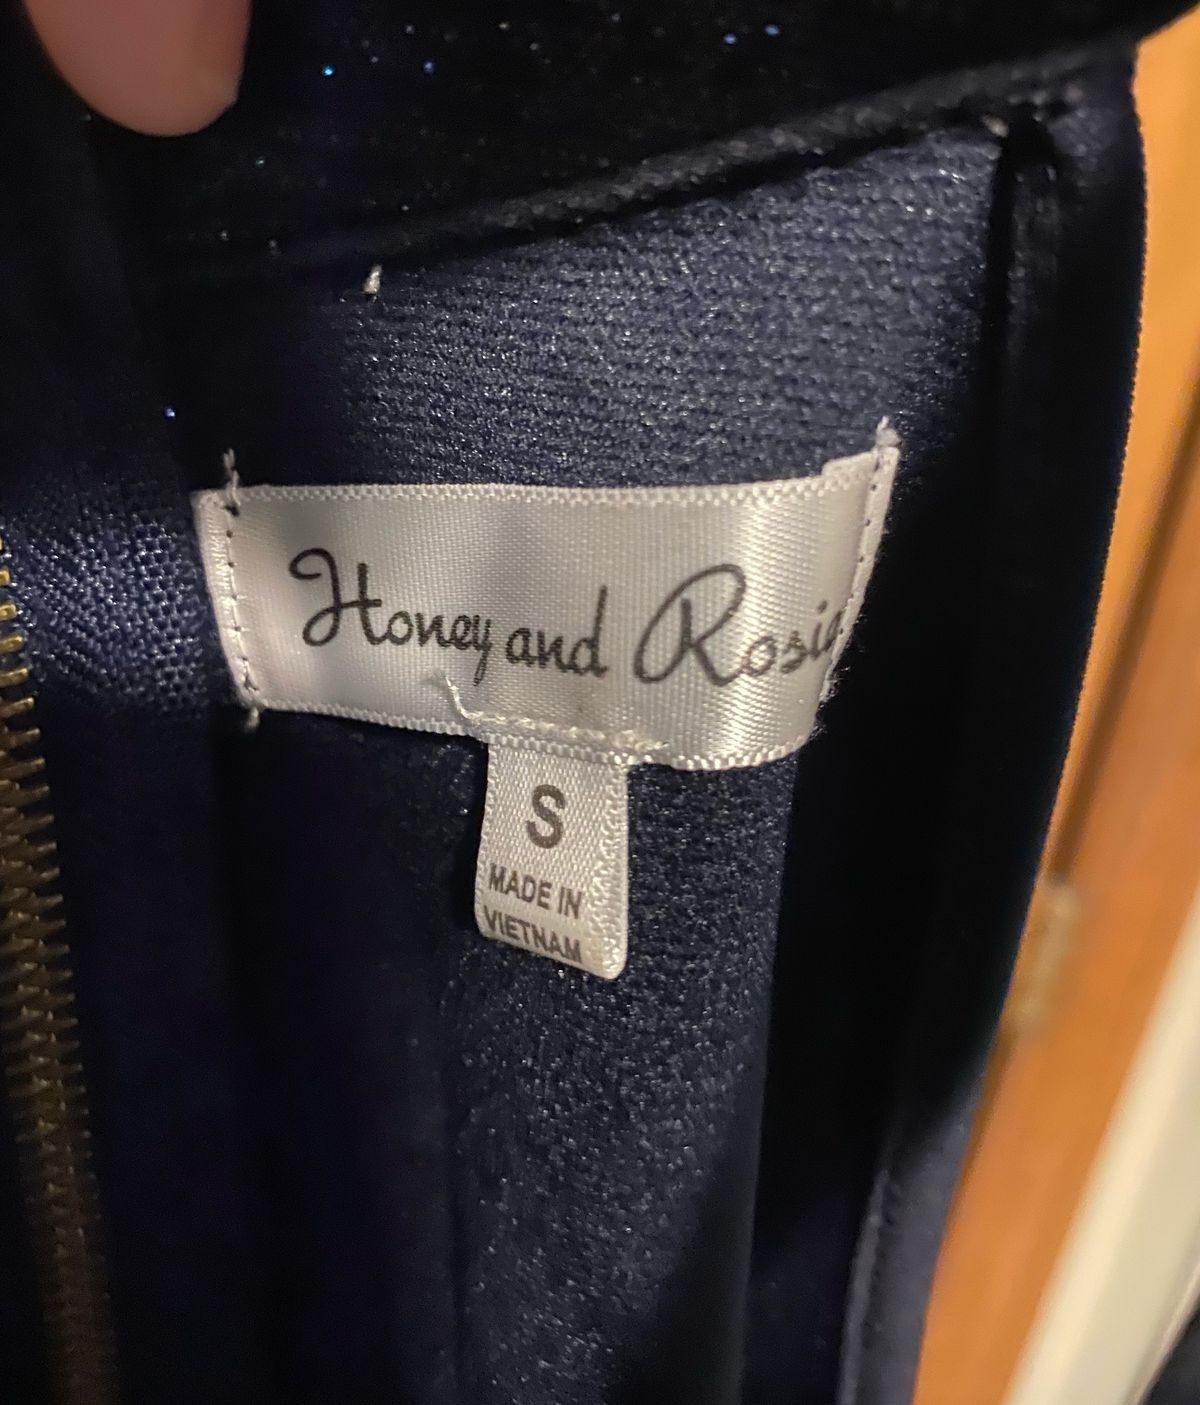 Size 4 Homecoming Navy Blue Cocktail Dress on Queenly